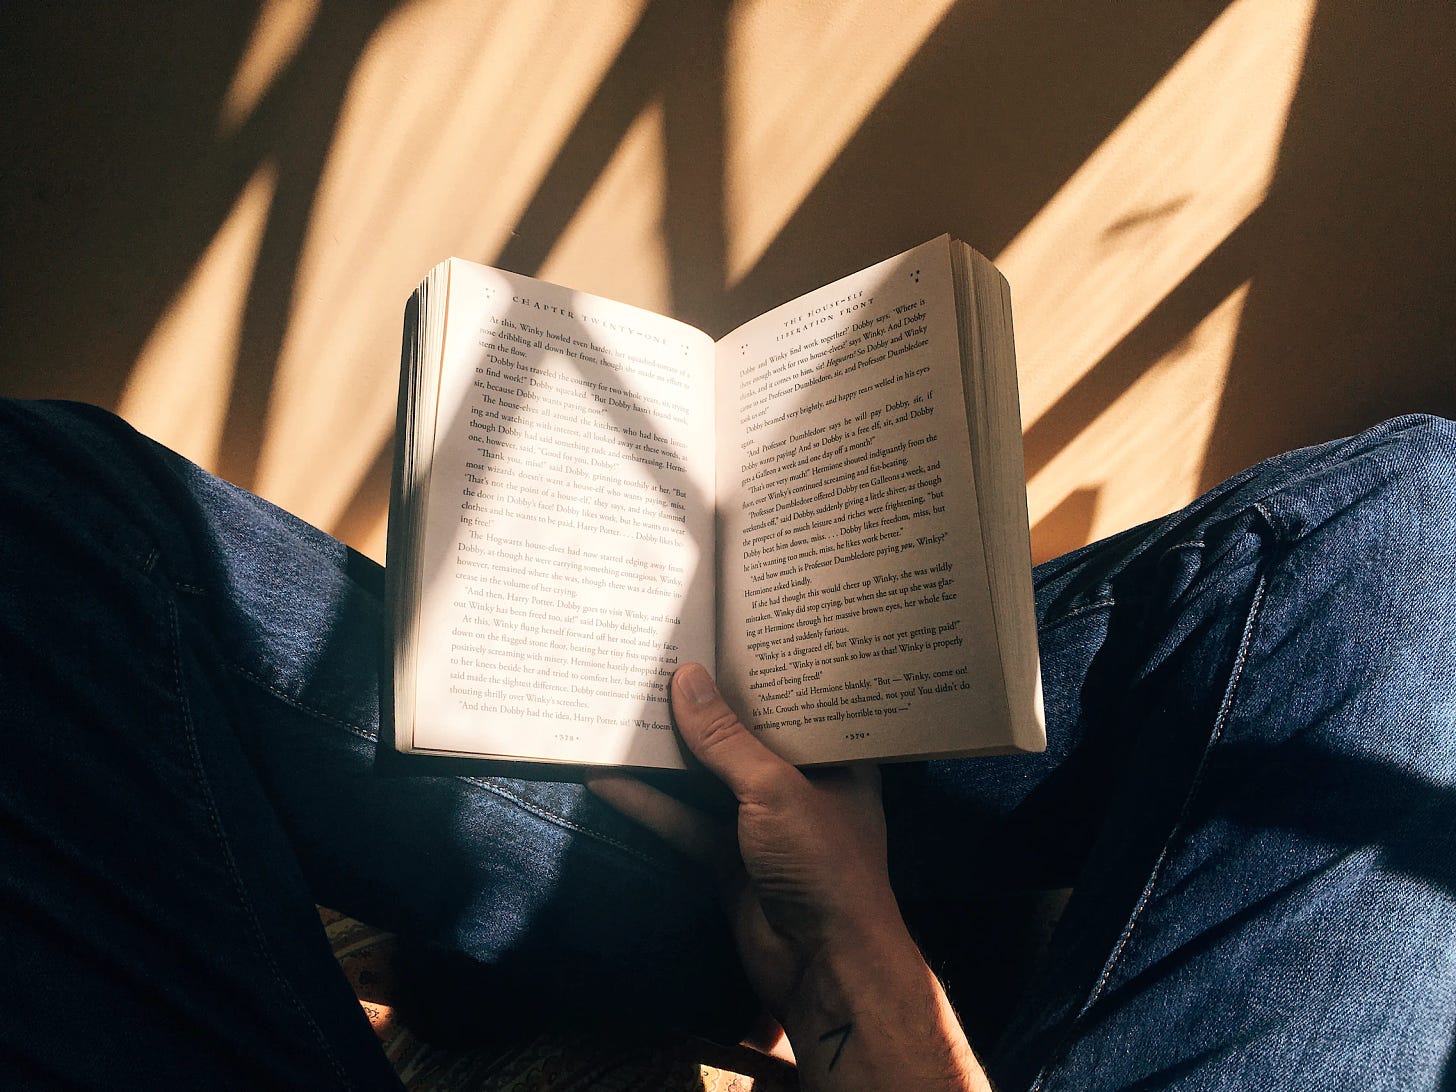 Looking downward at an open book held in someone’s lap in the sunshine